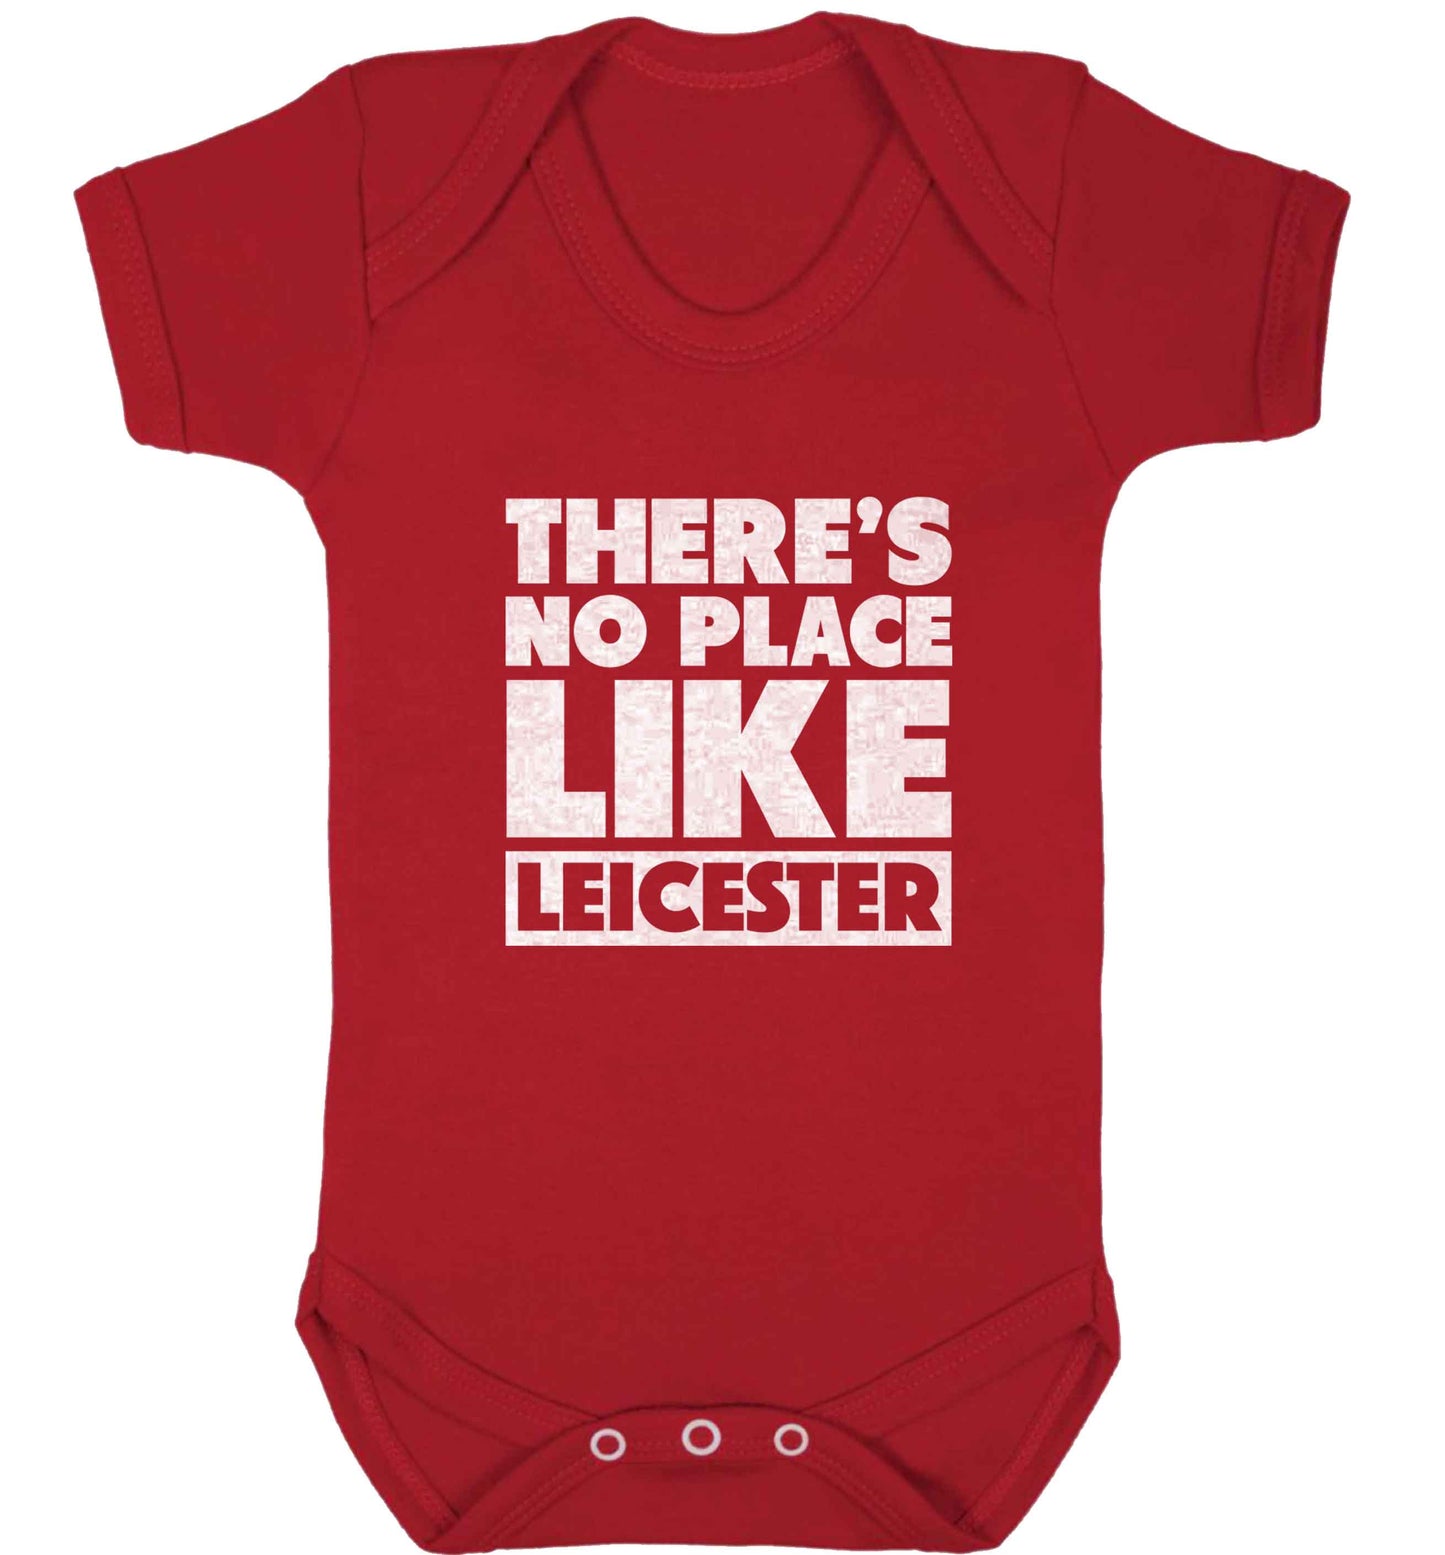 There's no place like Leicester baby vest red 18-24 months